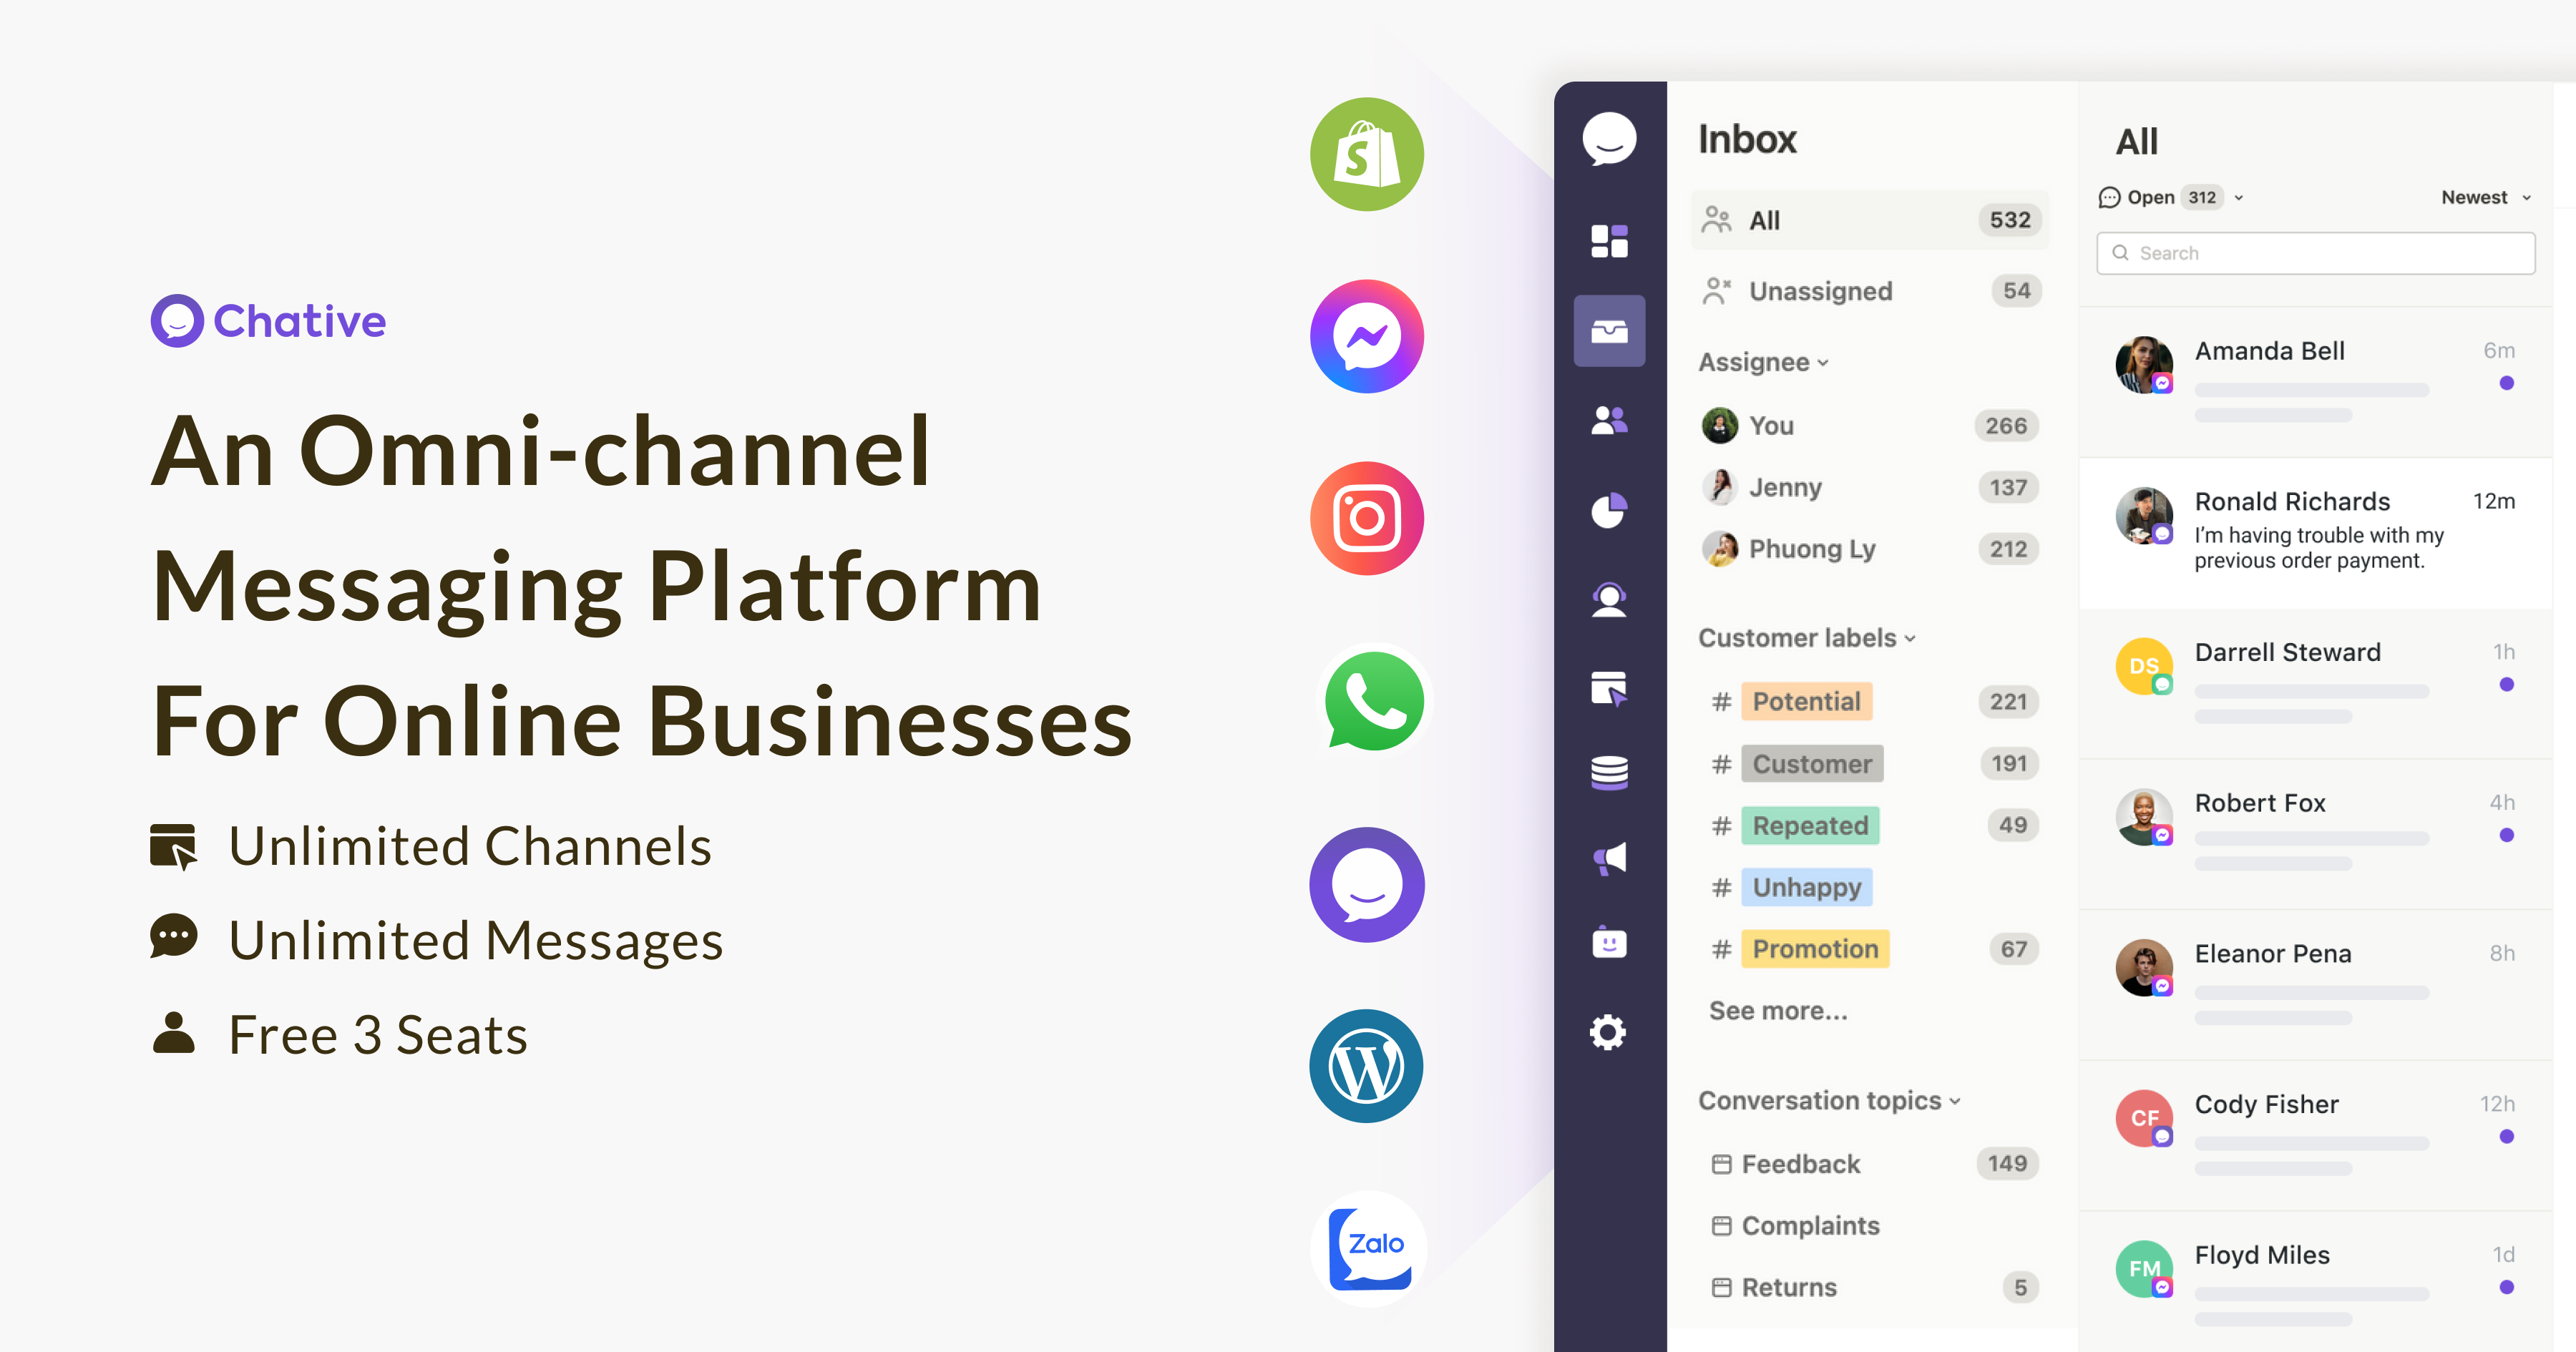 Chative is an omnichannel messaging solution for e-commerces or direct-to-customer online businesses of any size. Chative is affordable for all business with unlimited channels, messages and the pricing is completely transparent and startup-friendly.